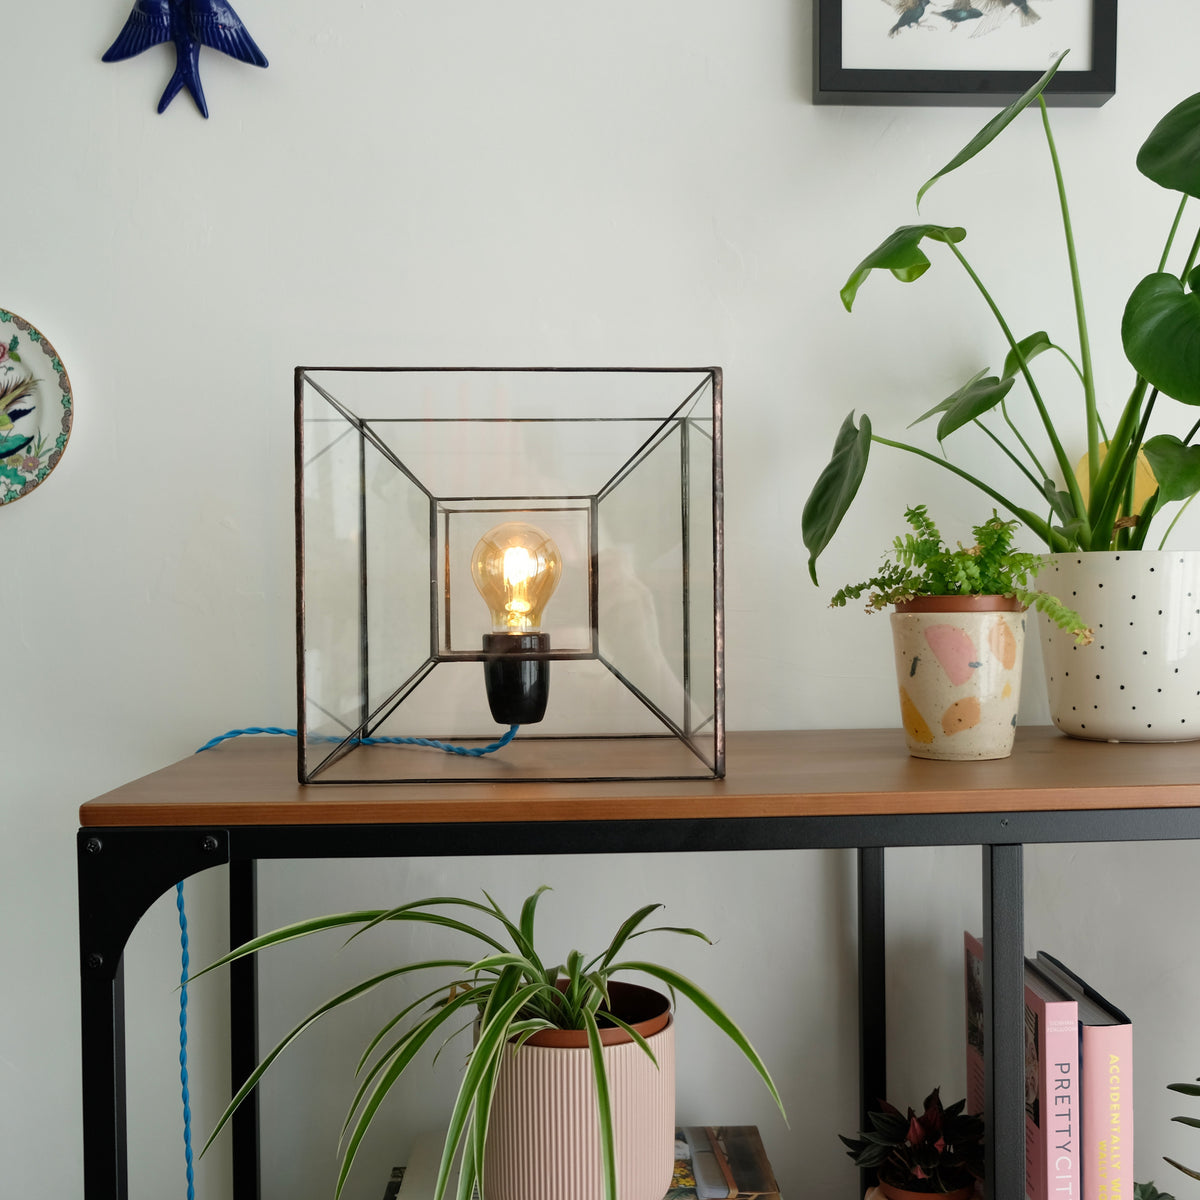 The Tesseract Lamp: A light from design to finish